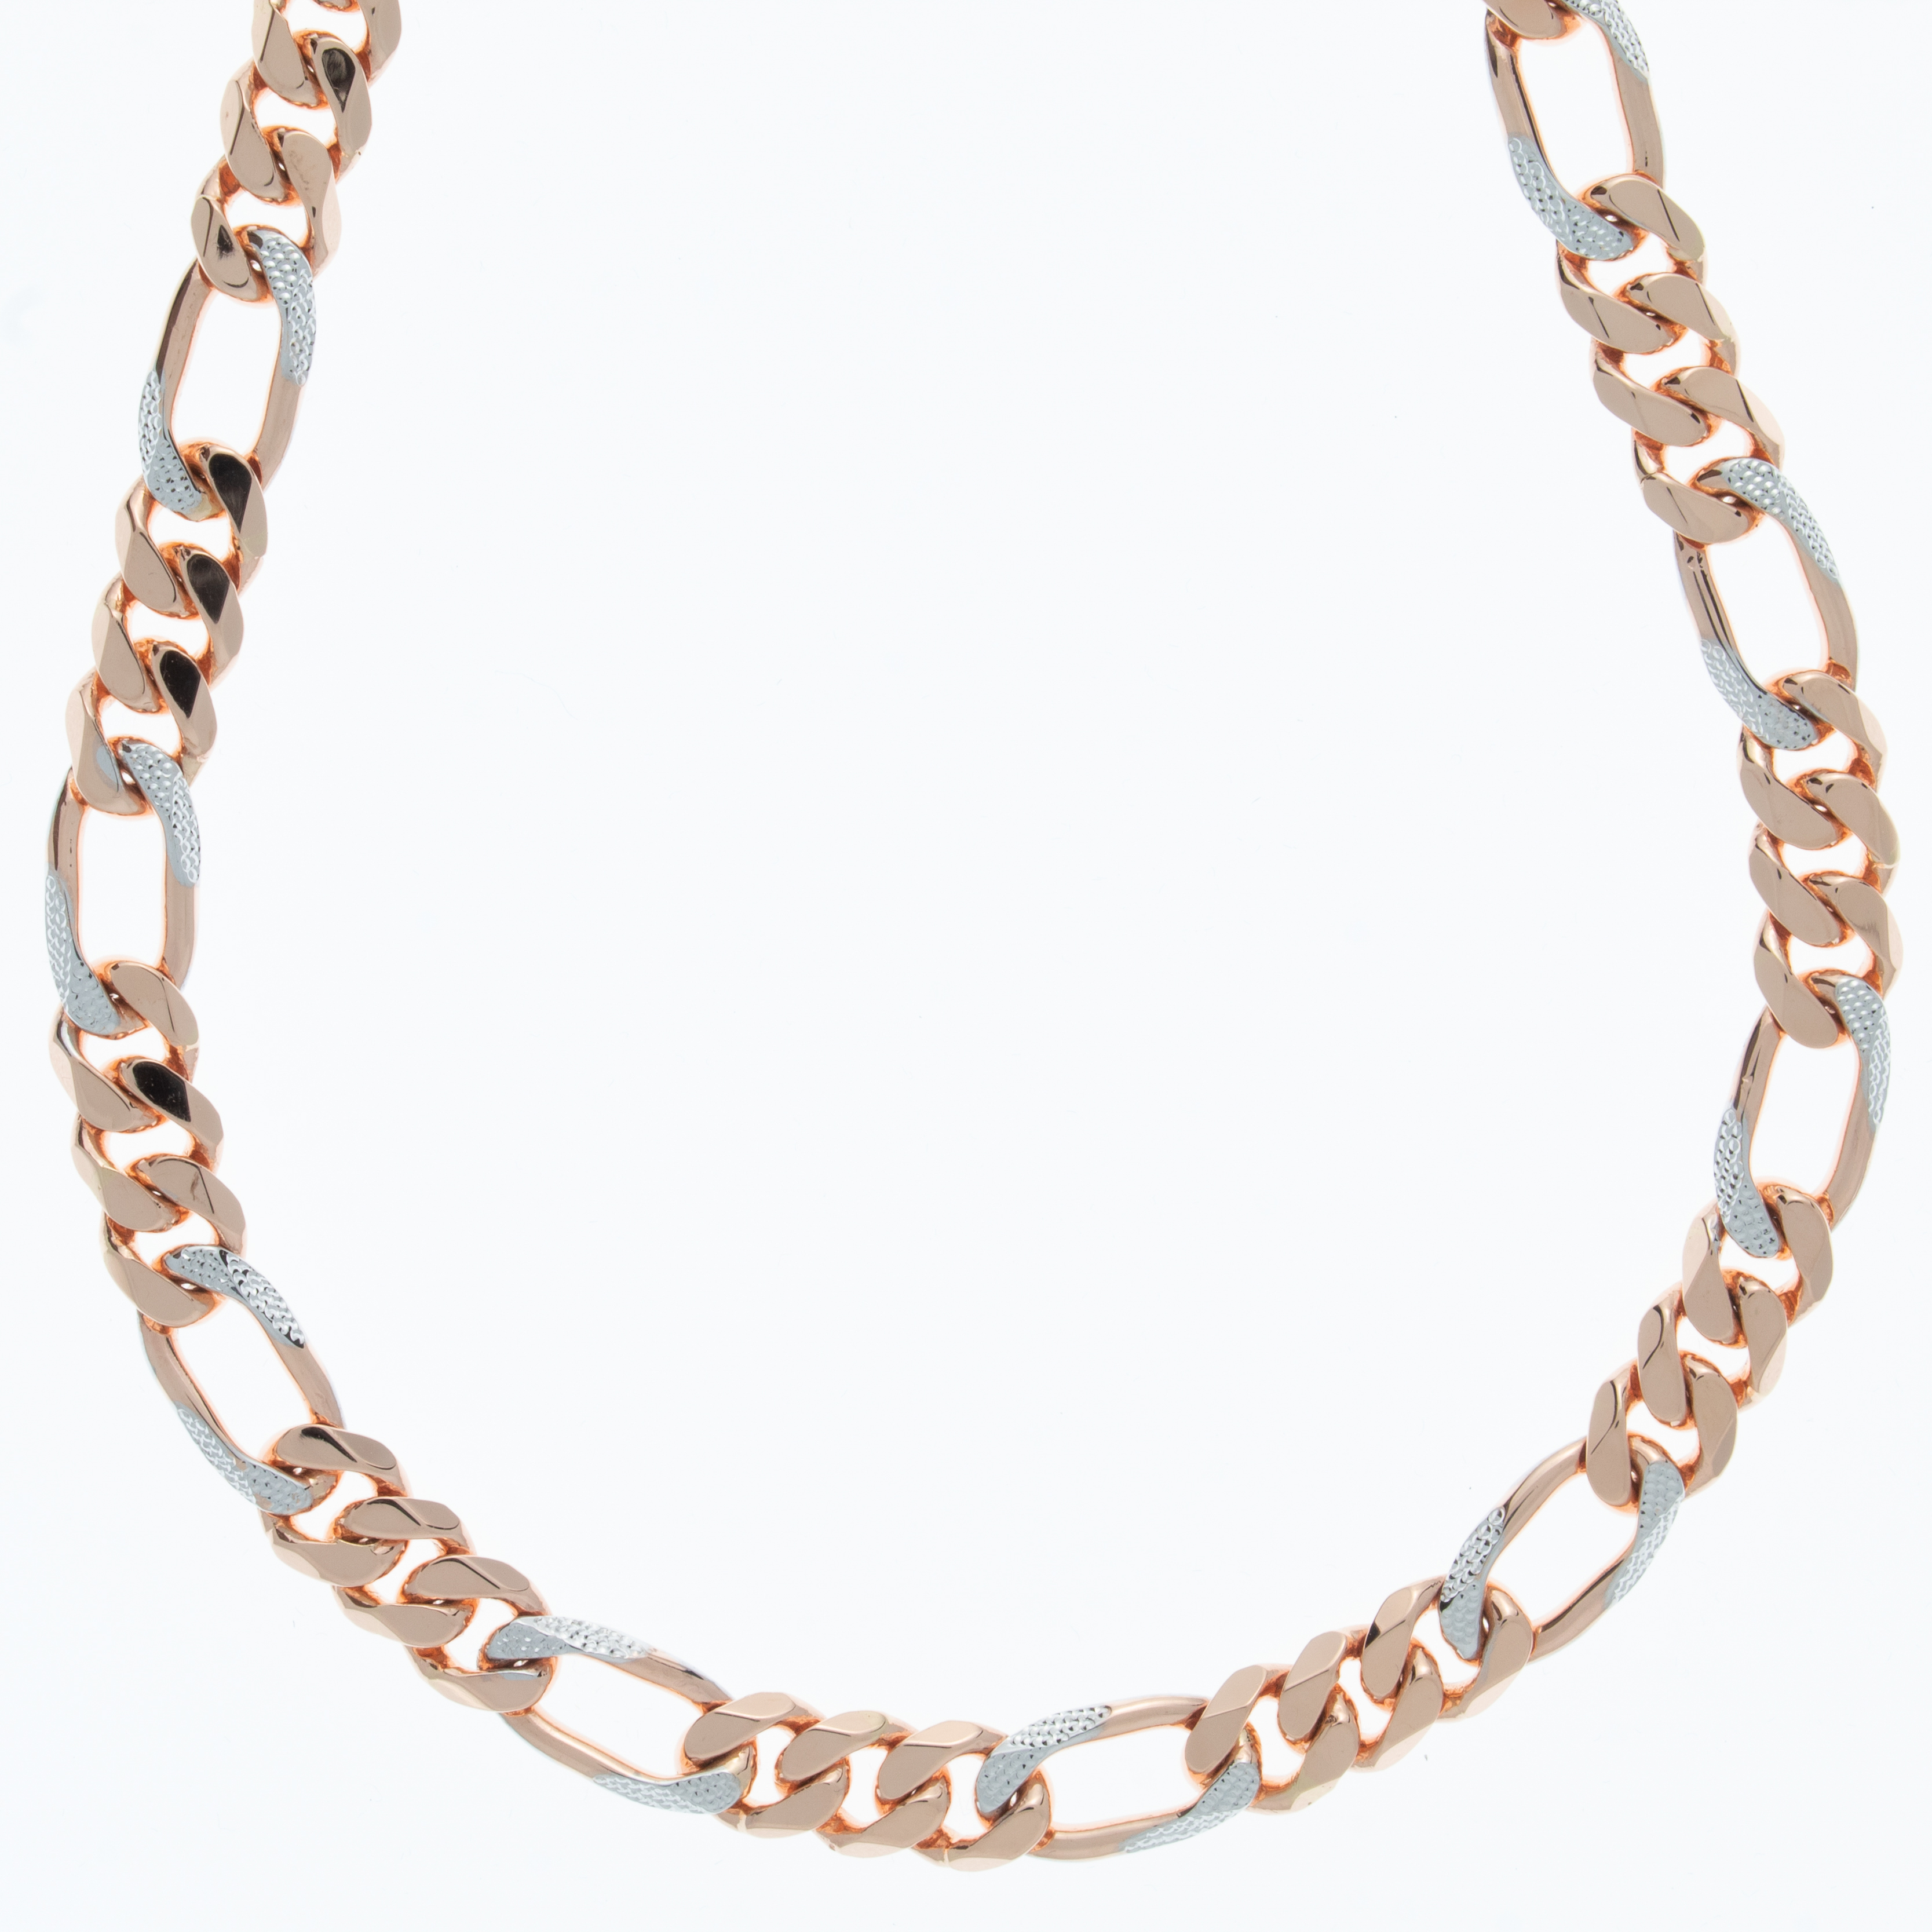 Oval link chain